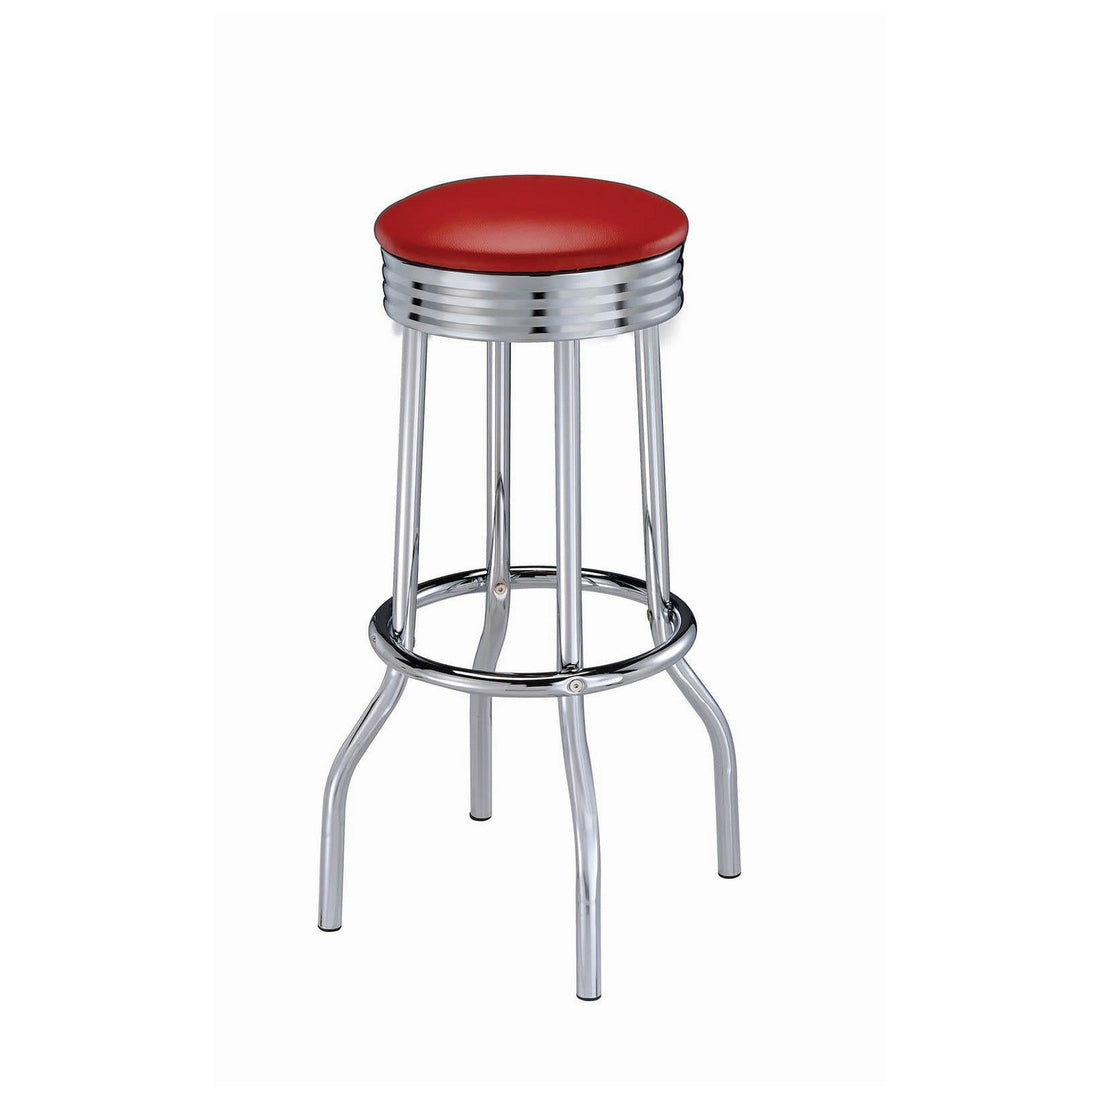 Hopkins Upholstered Top Bar Stools Red and Chrome (Set of 2) 2299R